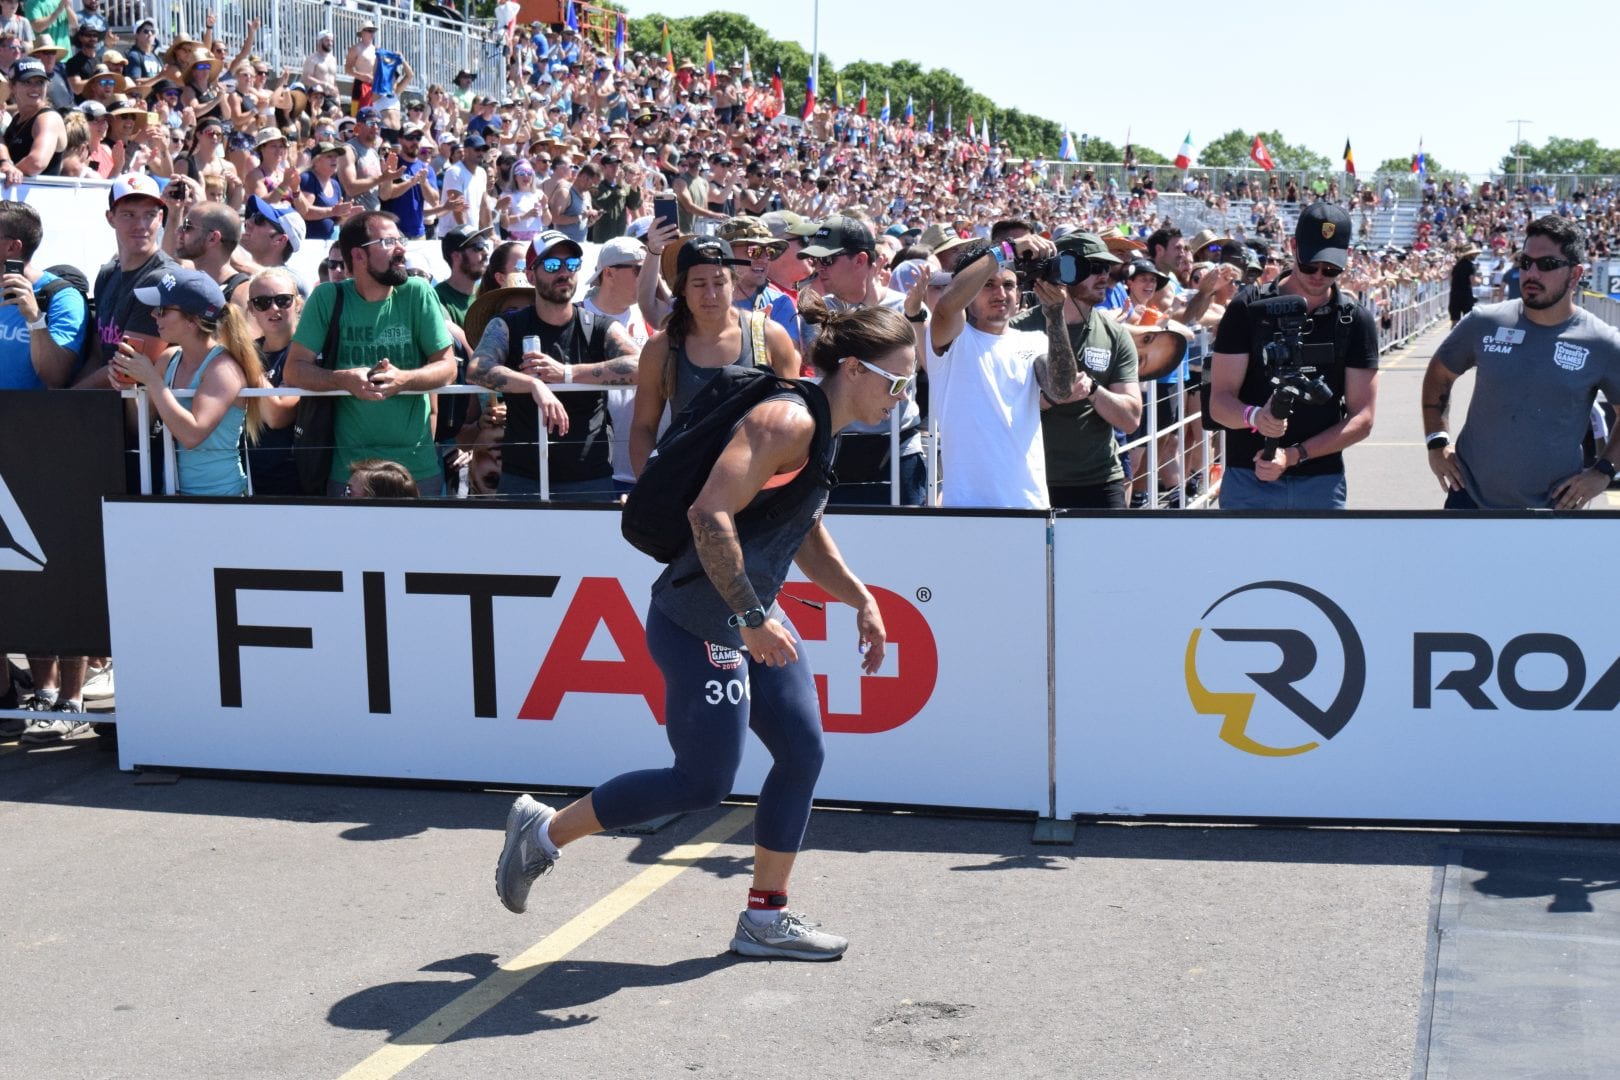 Meg Reardon completes the Ruck Run event at the 2019 CrossFit Games.